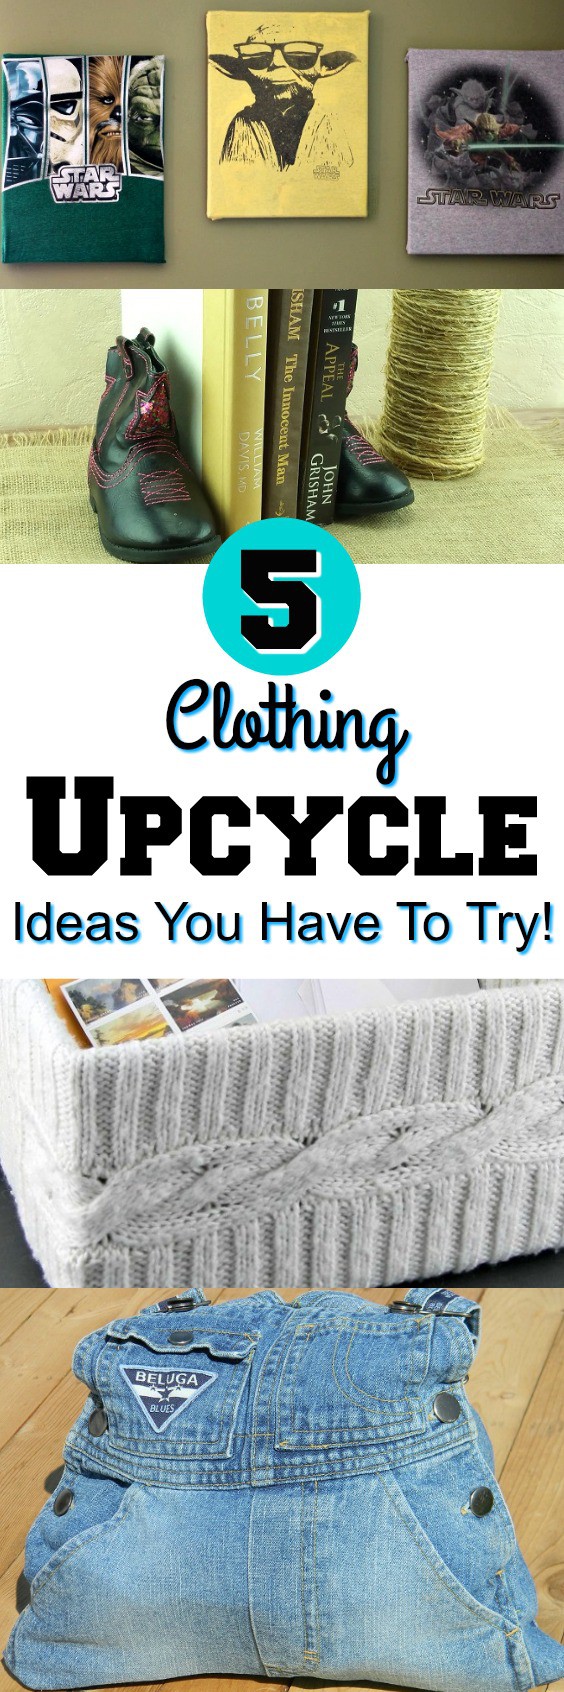 Have some old clothing and looking for ways to upcycle it? Check out these 5 Clothing Upcycle Ideas You Have To Try!